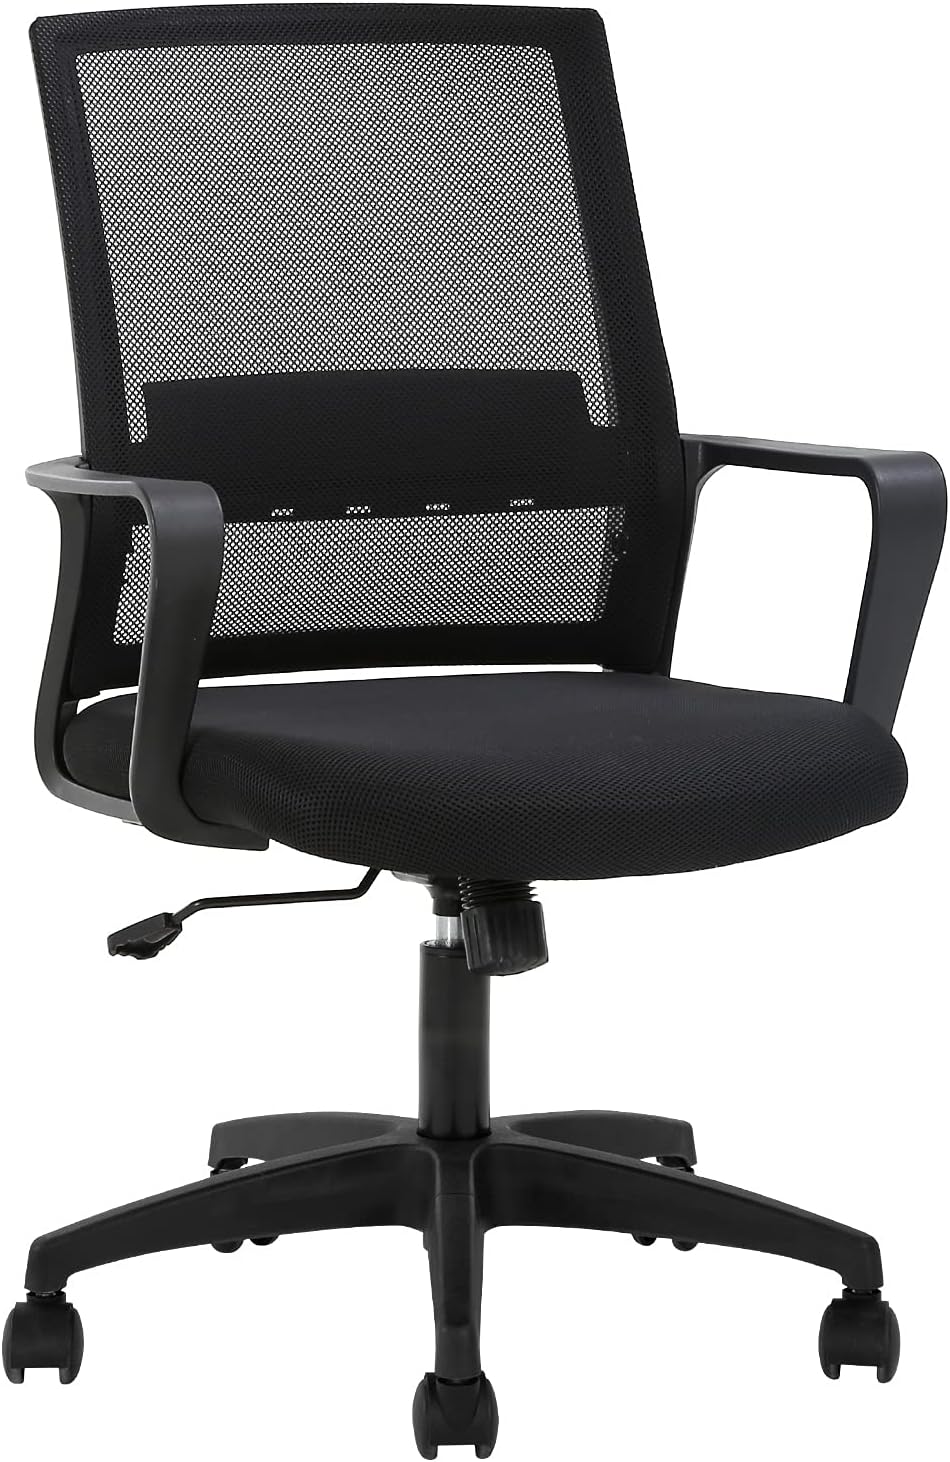 FDW Home Office Chair Review